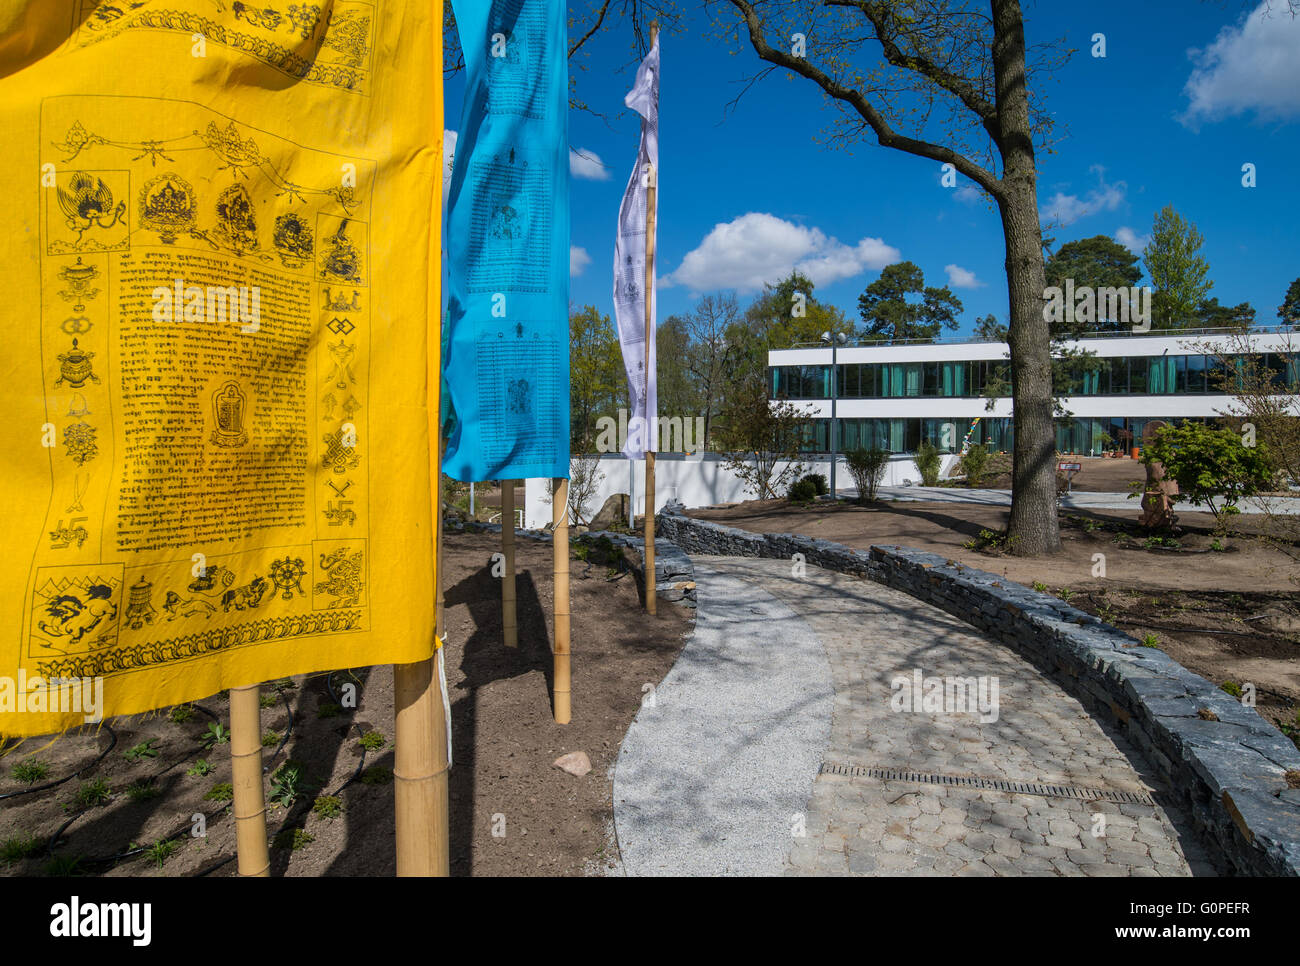 Tibetan prayer flags flying in front of the newly erected Sukhavati Spiritual Care Center in Bad Saarow, Germany, 02 May 2016. The Buddhist residential and nursing project is scheduled to be opened on 04 May 2016. The name of the centre includes the term 'Sukhavati' that translates to 'Land of Bliss.' Photo: PATRICK PLEUL/dpa Stock Photo